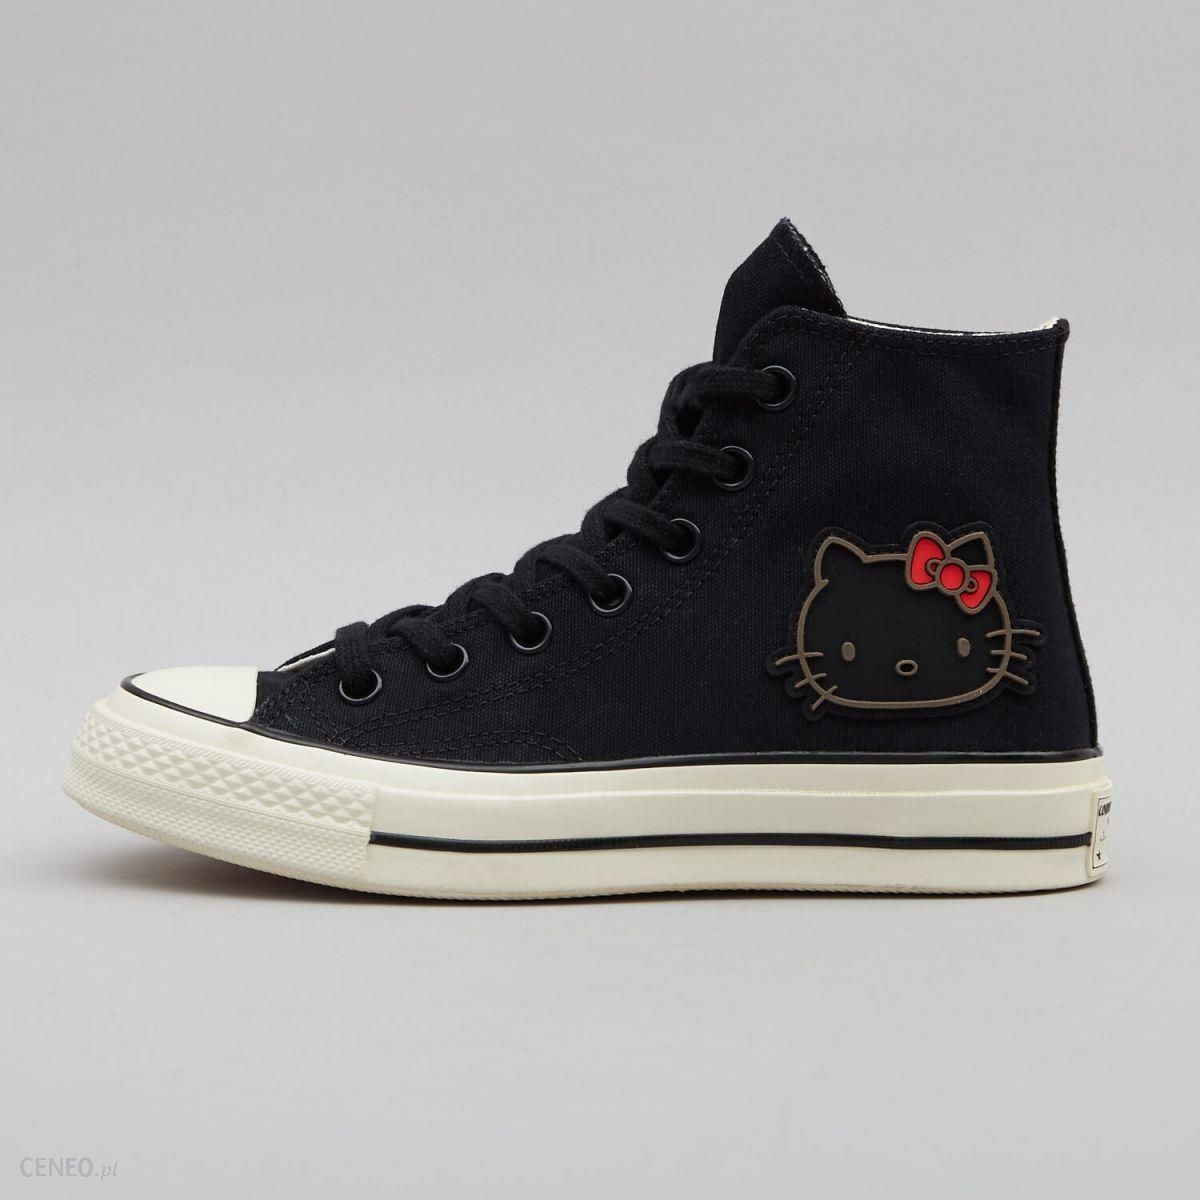 converse x hello kitty torba coupon code for 8f7f8 28a3f